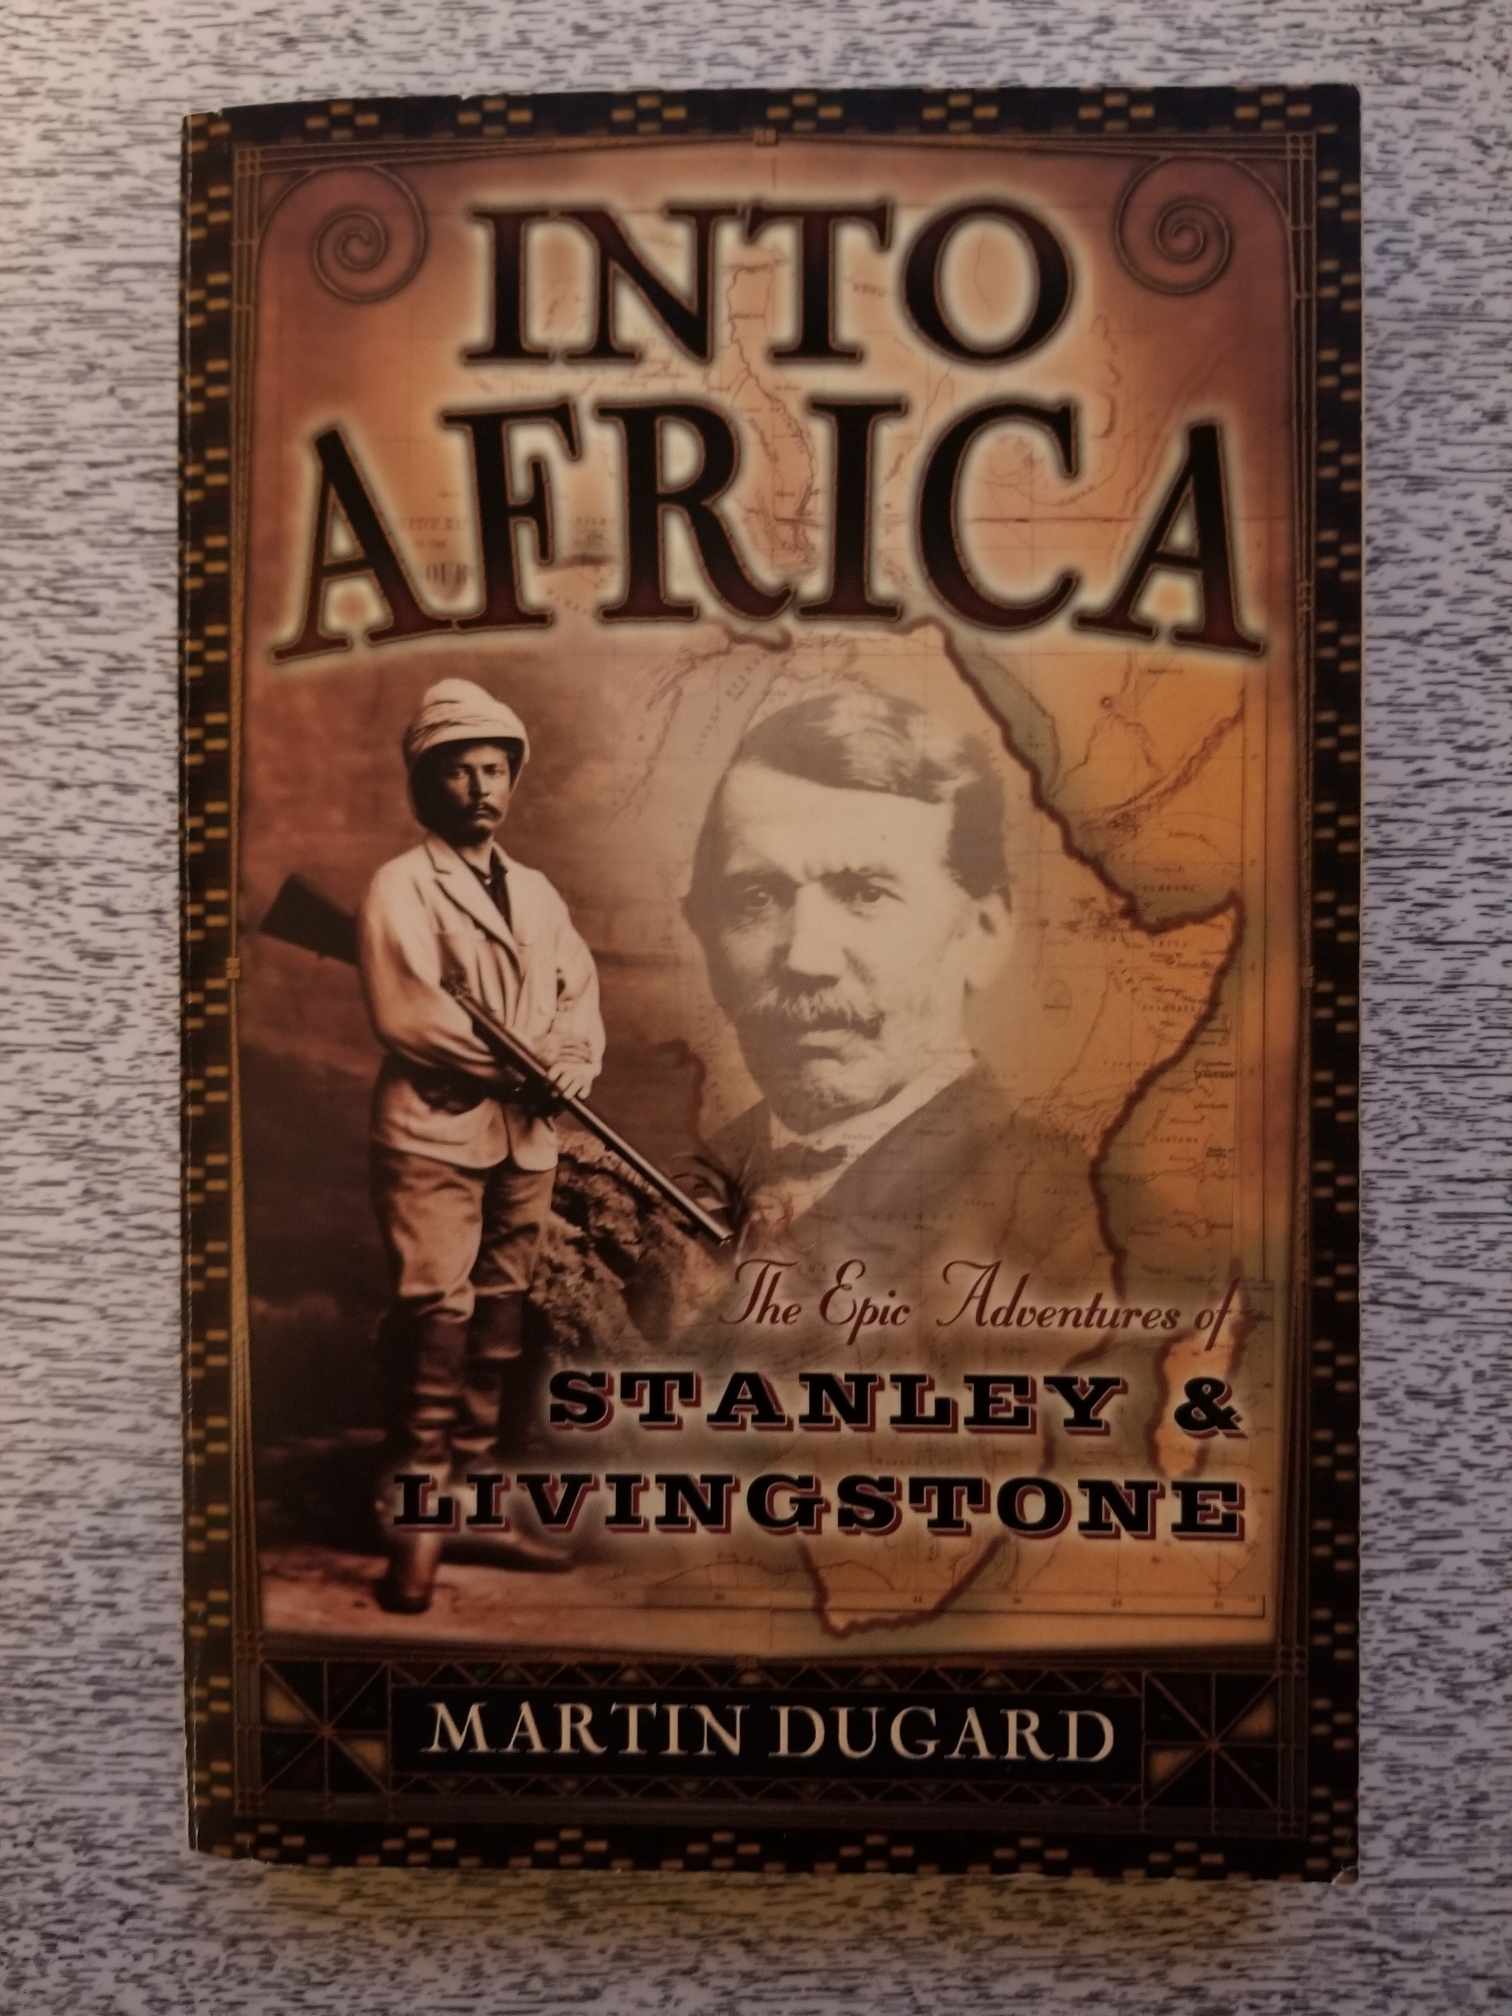 Into Africa by Martin Dugard